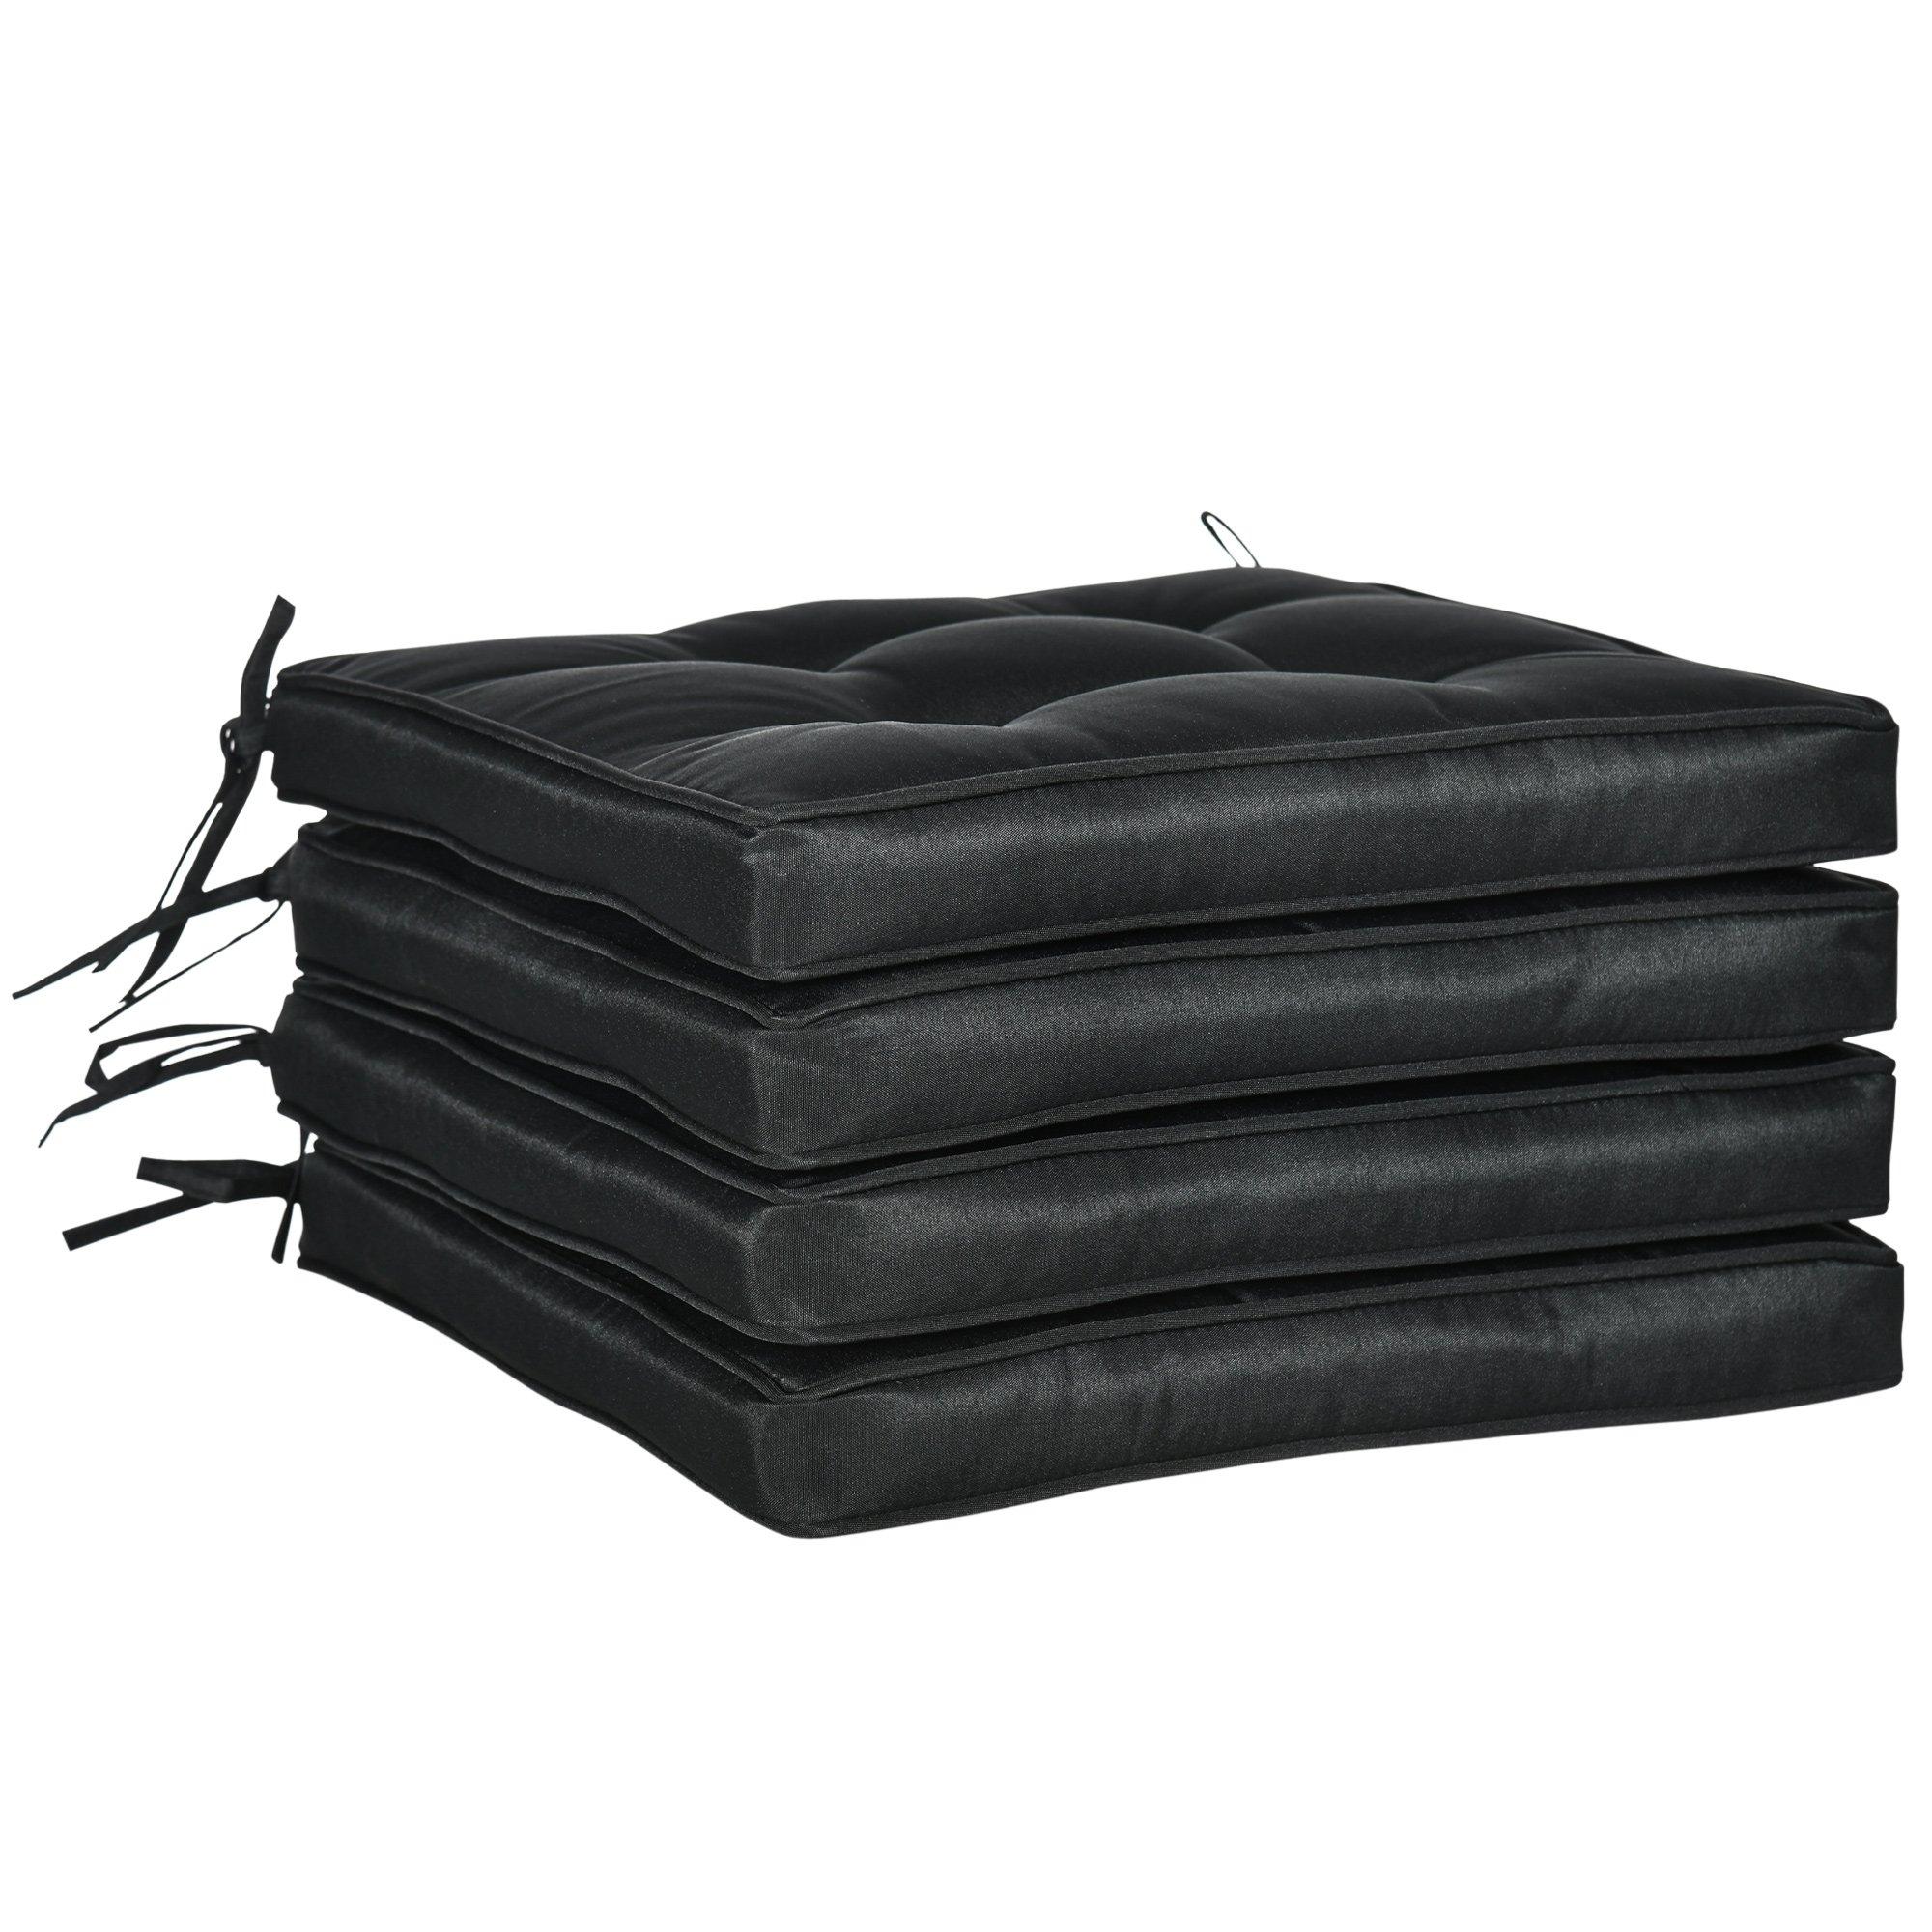 42 x 42cm Replacement Garden Seat Cushion Pad with Ties